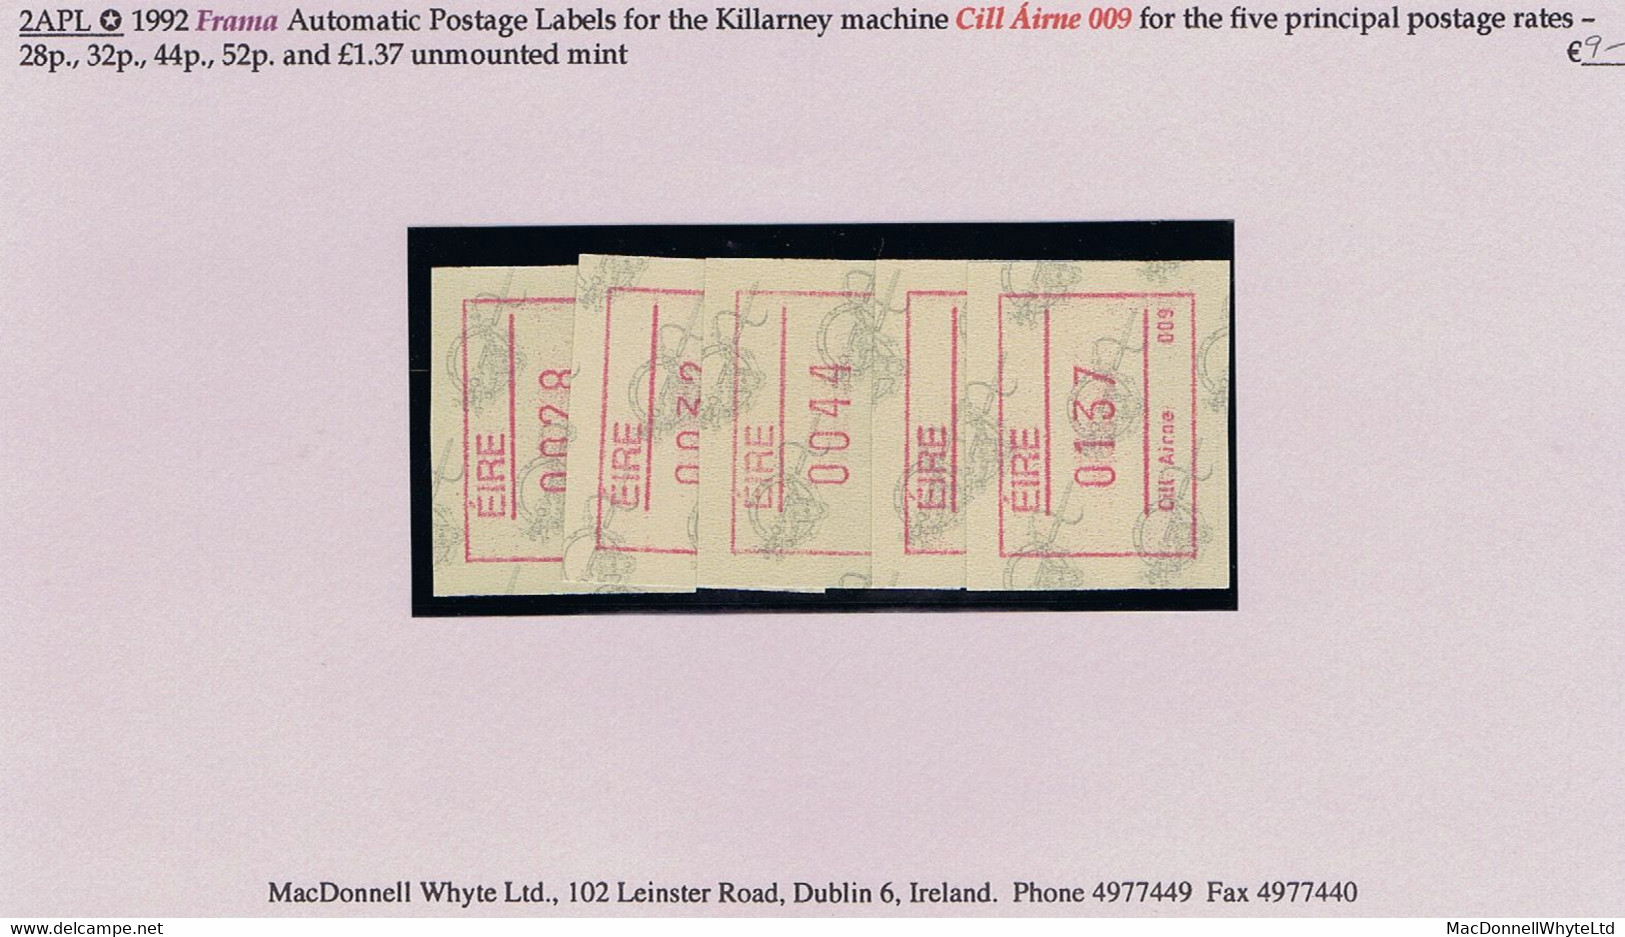 Ireland 1992 Frama Automatic Postage Labels For Killarney 009 Machine For Five Rates 28p, 32p, 44p, 52p, £1.37 Mint - Franking Labels